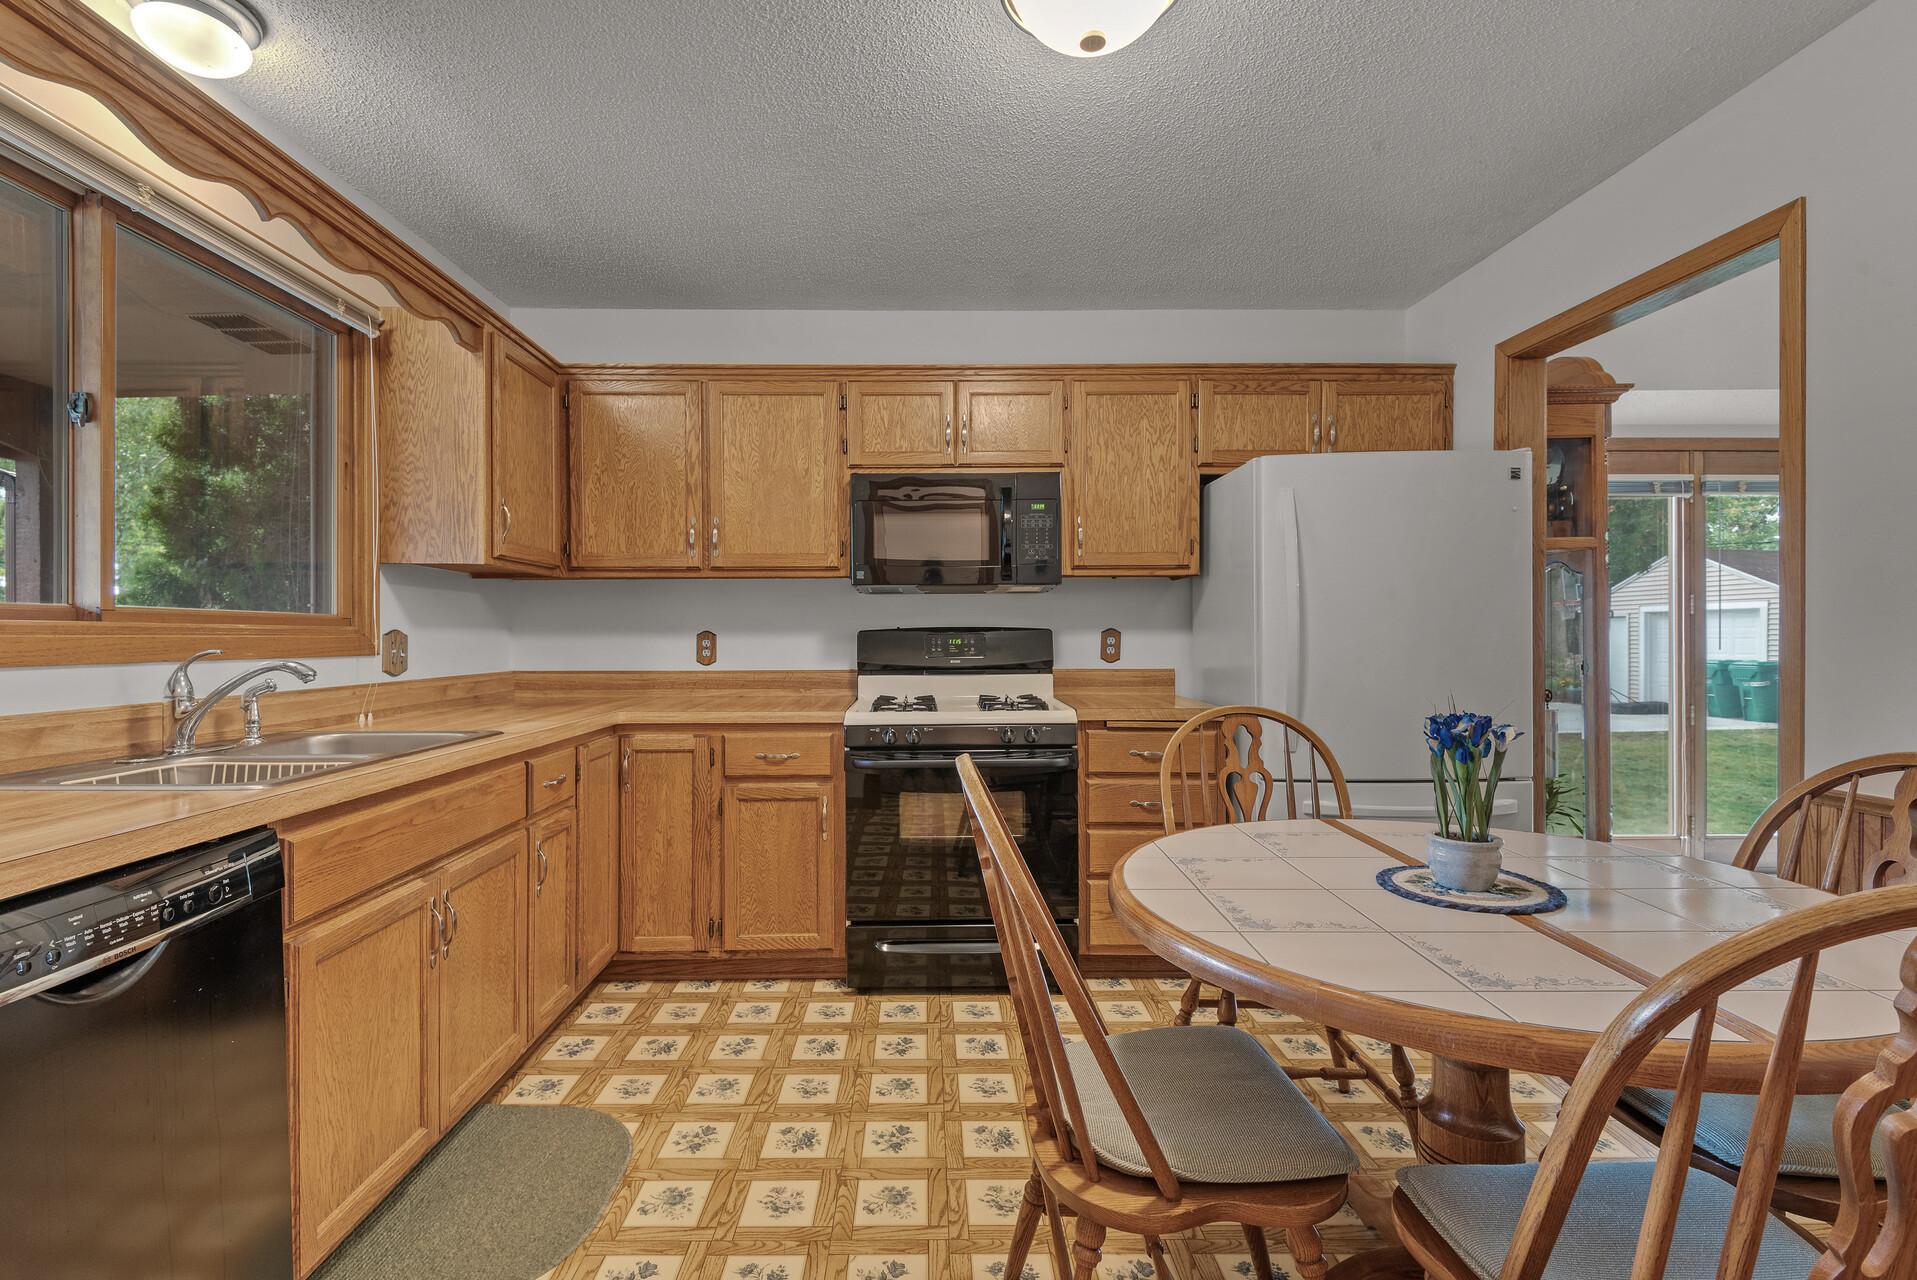 The kitchen has an eat-in space, tons of cabinets for storage that are in excellent condition. Kitchen has a window over the sink facing the front yard. This makes the kitchen bright, open and inviting